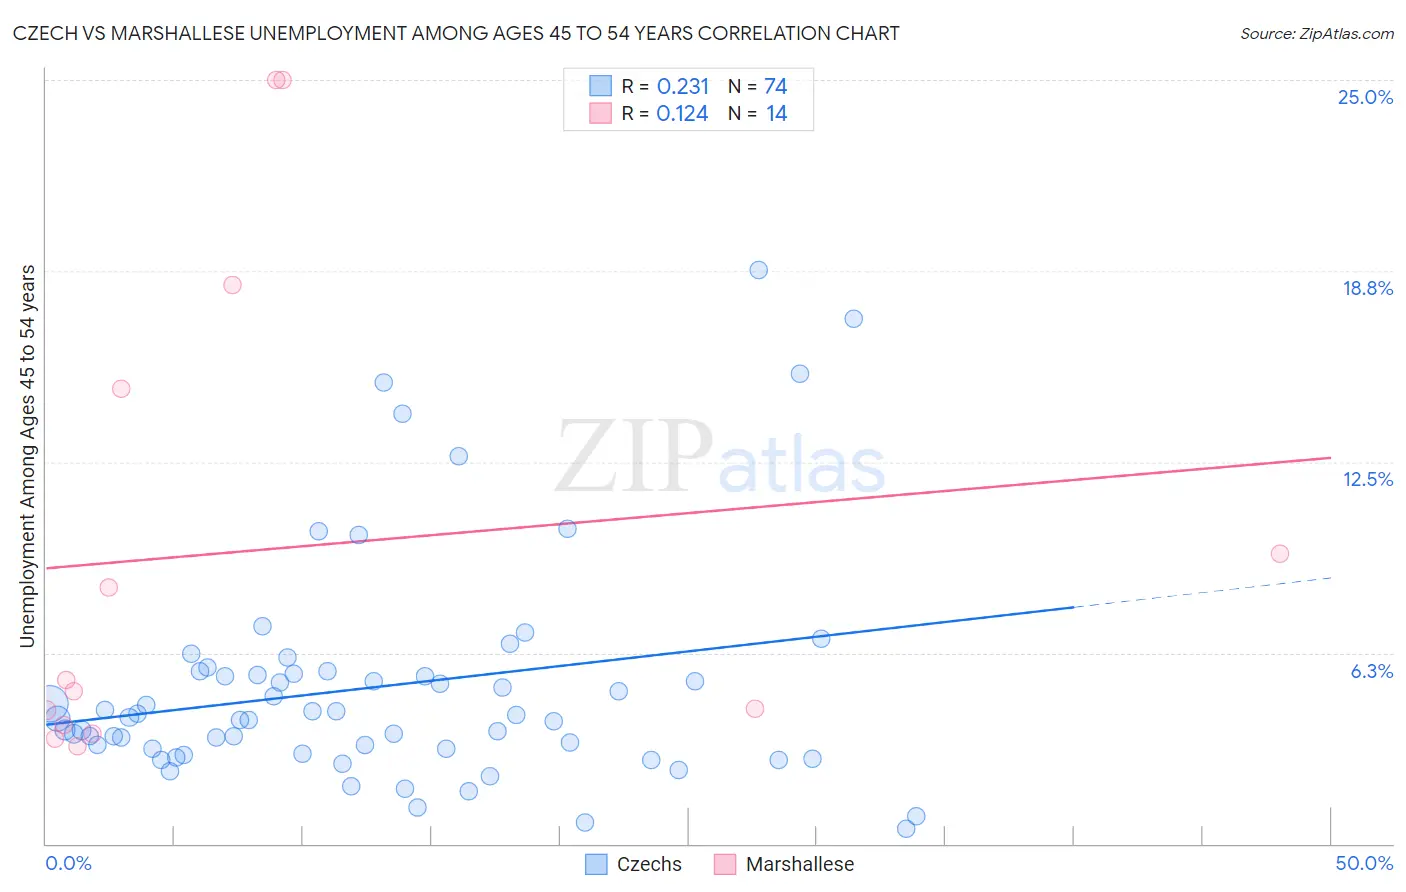 Czech vs Marshallese Unemployment Among Ages 45 to 54 years